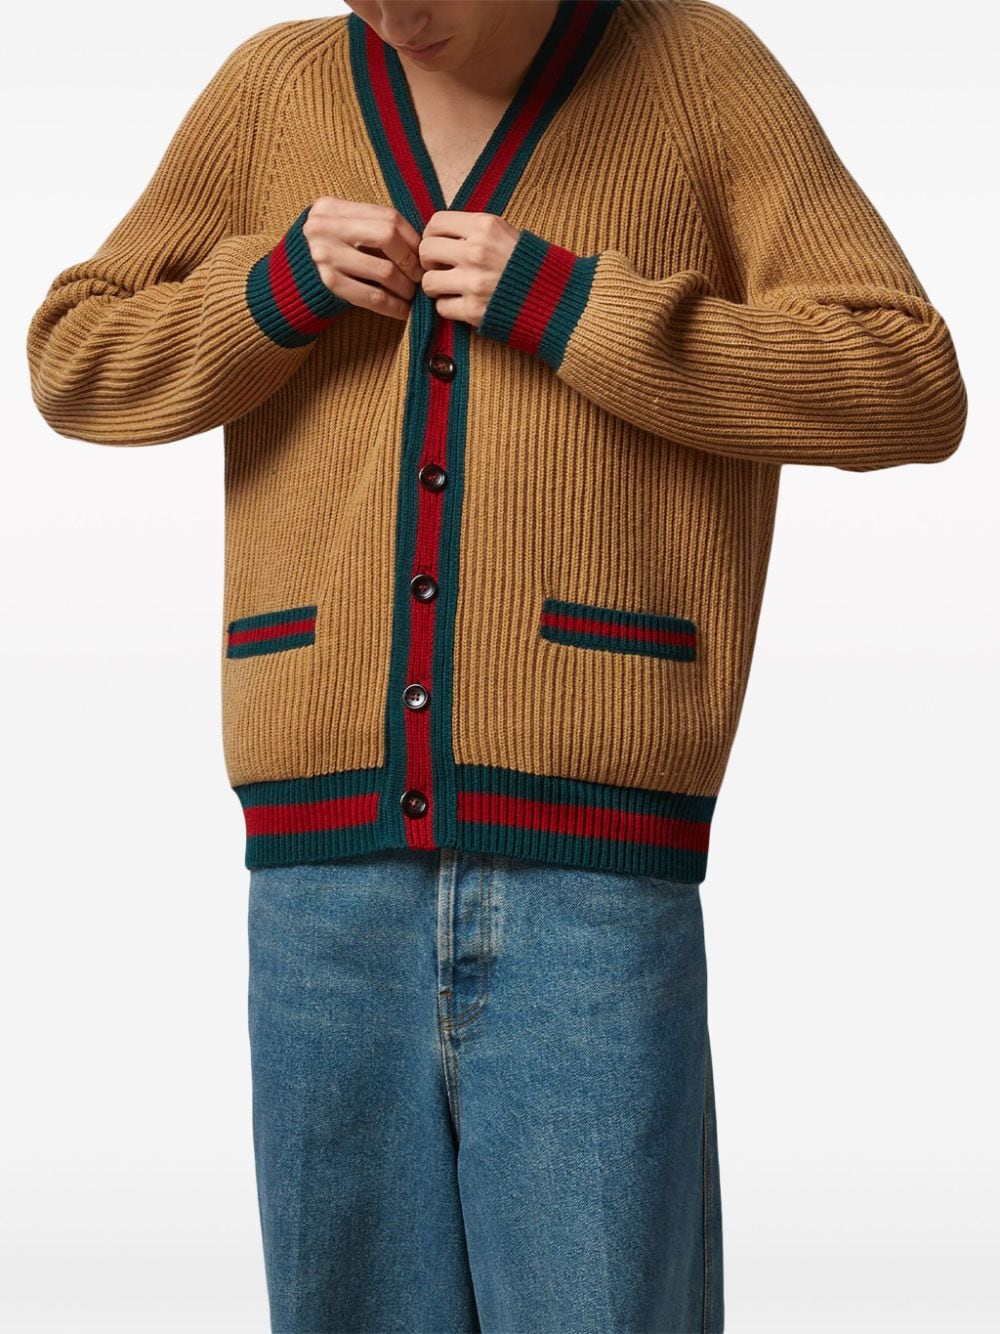 GUCCI Tan Wool Cardigan for Men - SS24 Collection